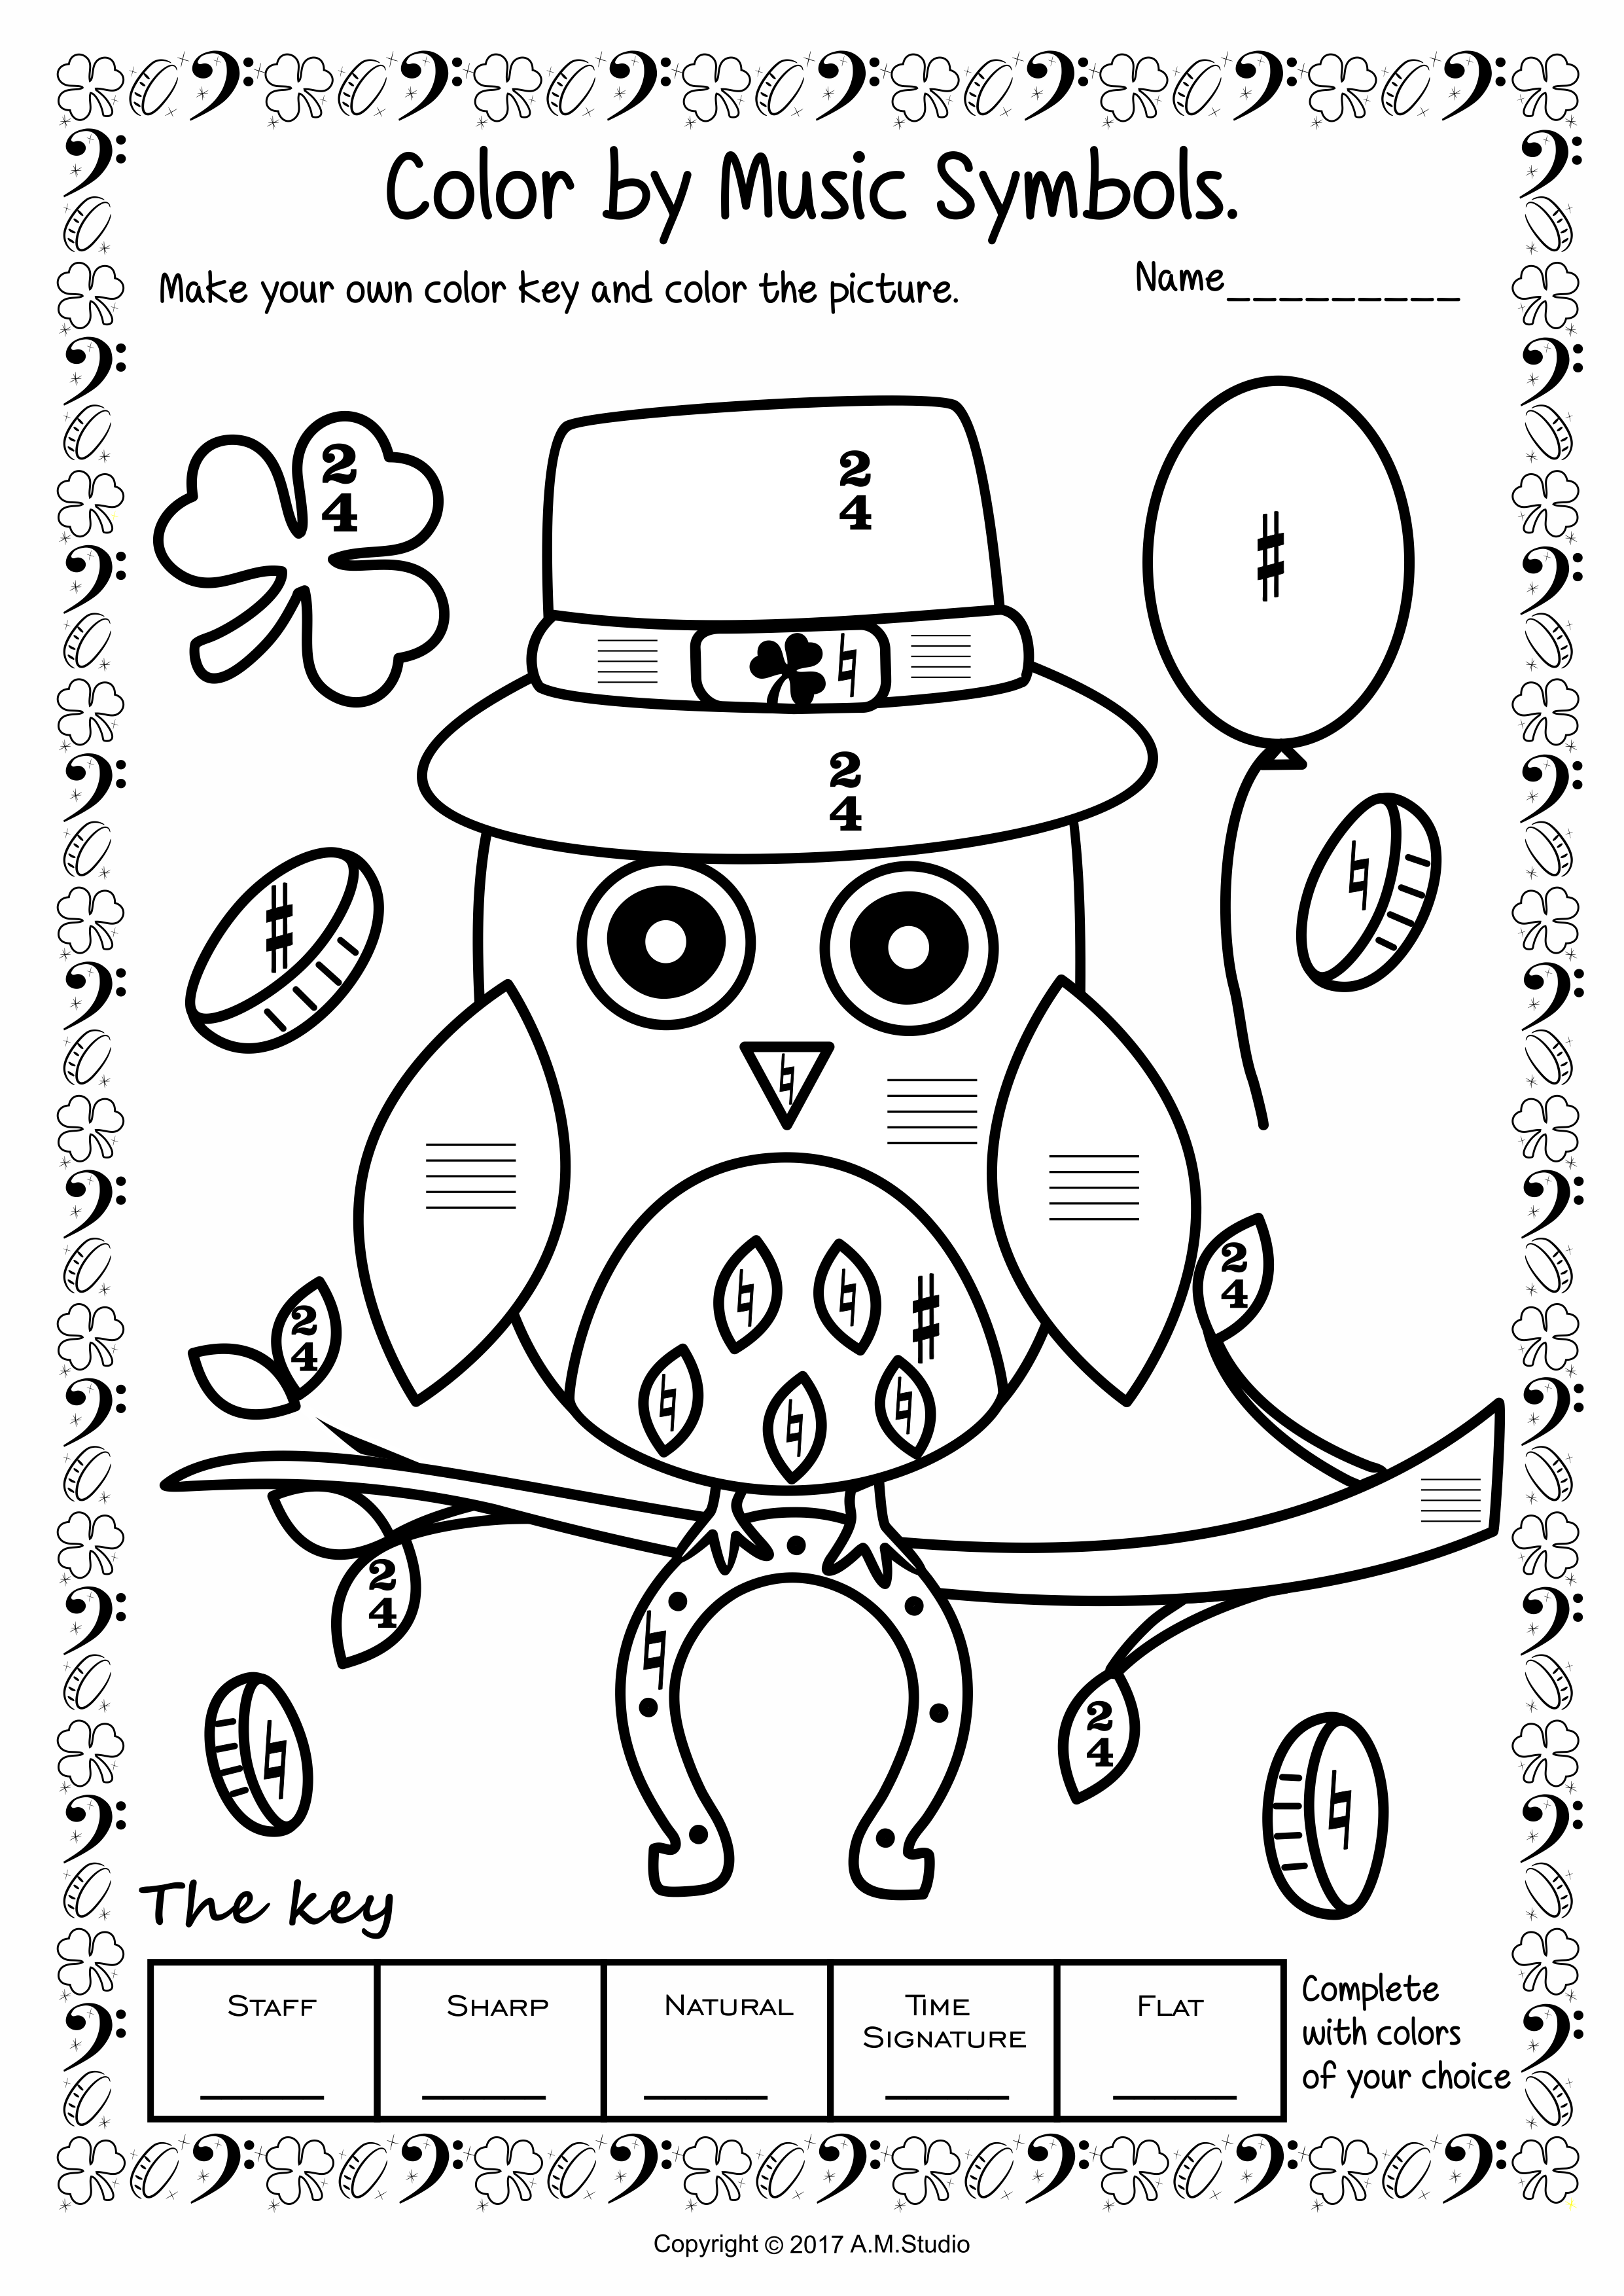 St. Patrick`s Day Music Coloring Worksheets (img # 1)